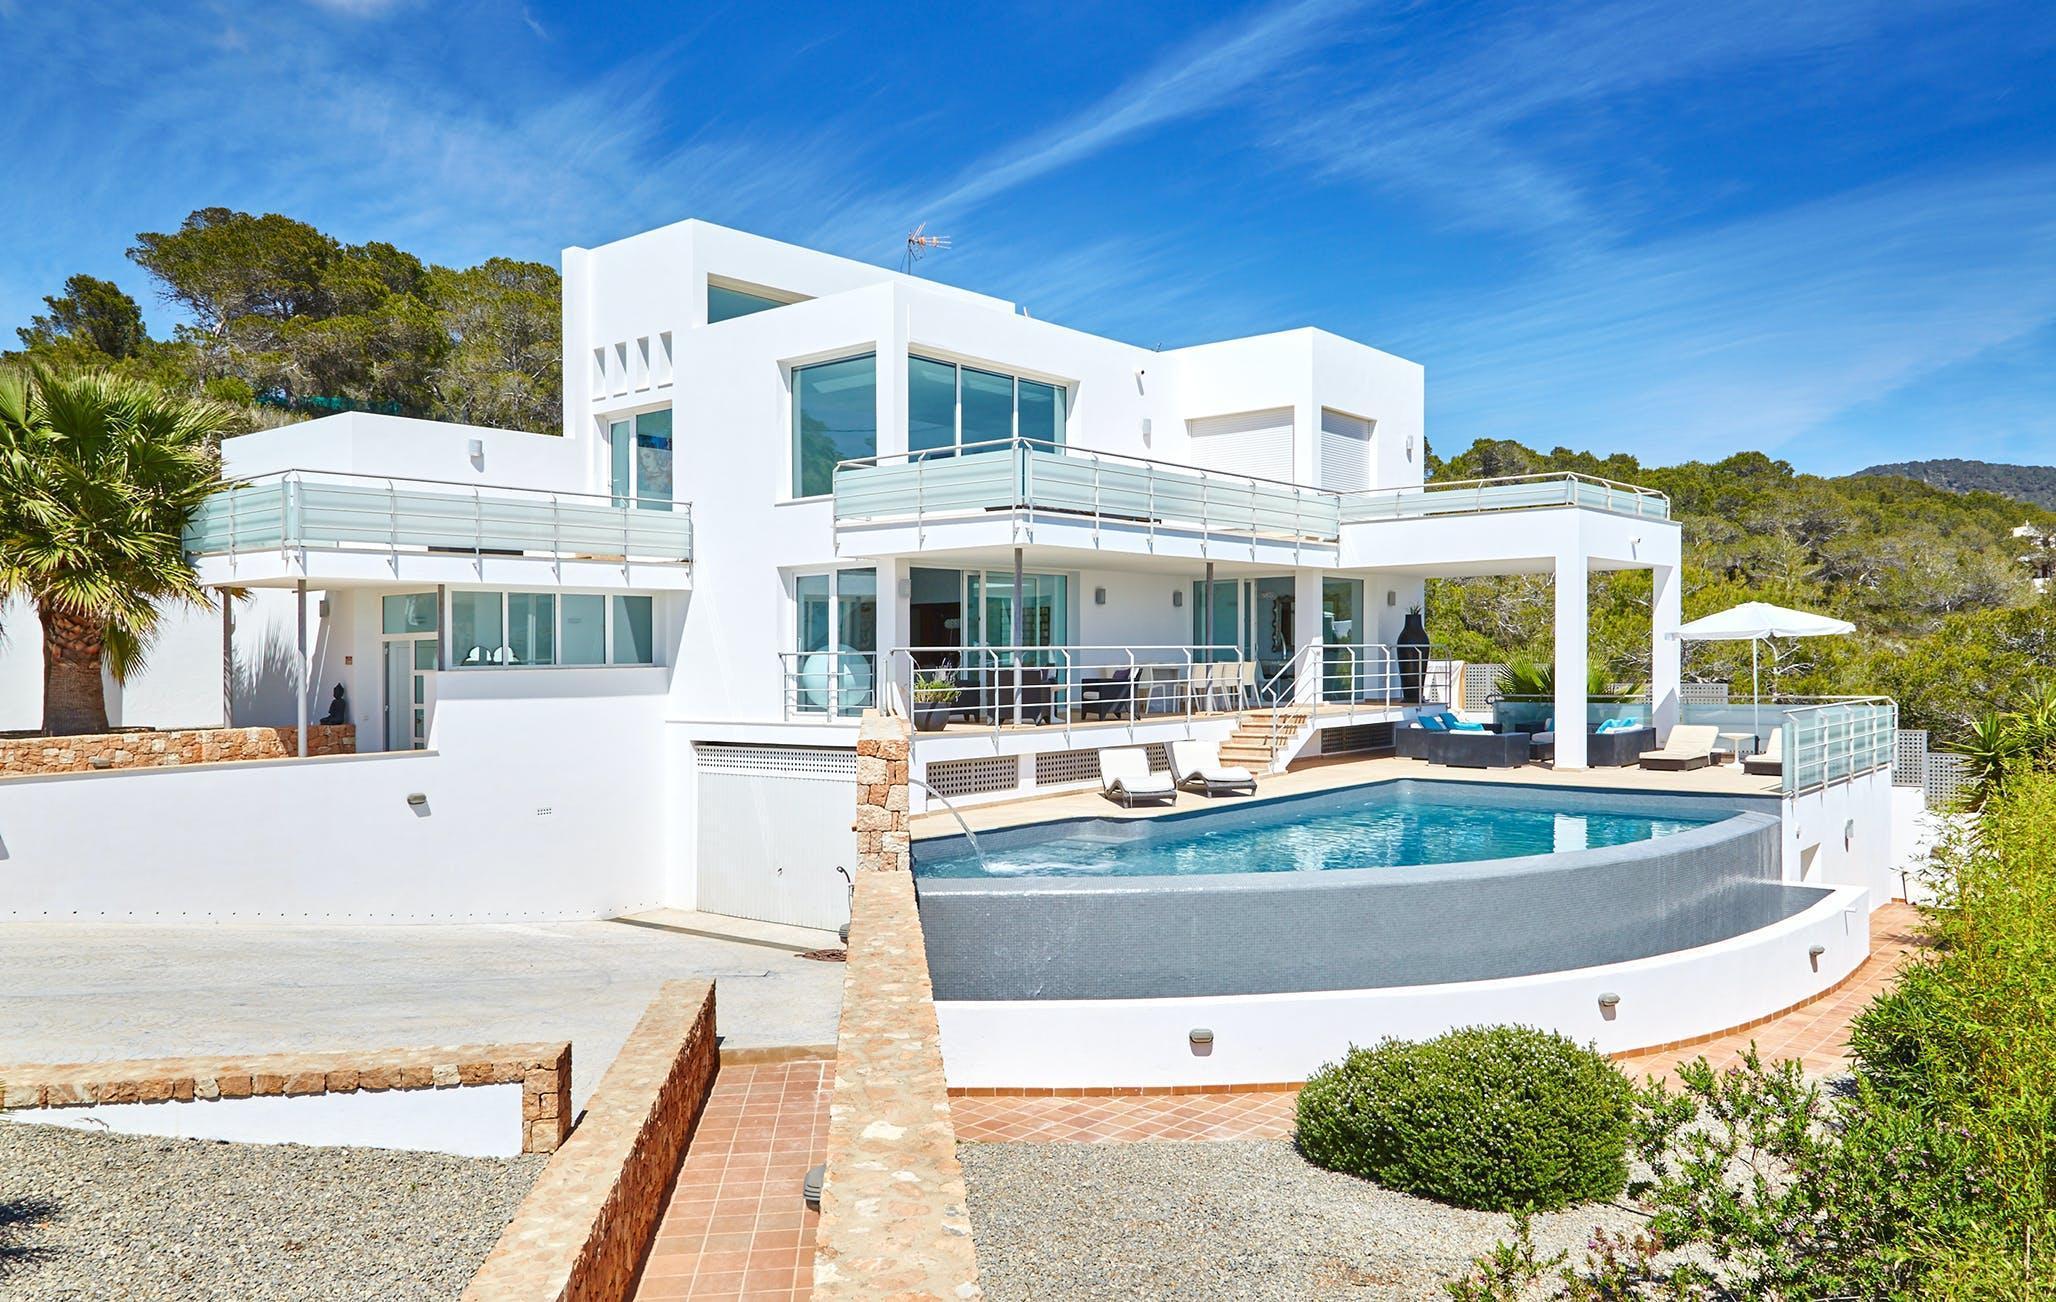 You are currently viewing Villa Andrey – ‘Attractive, modern villa just 150m away from the beach at Cala Tarida.’